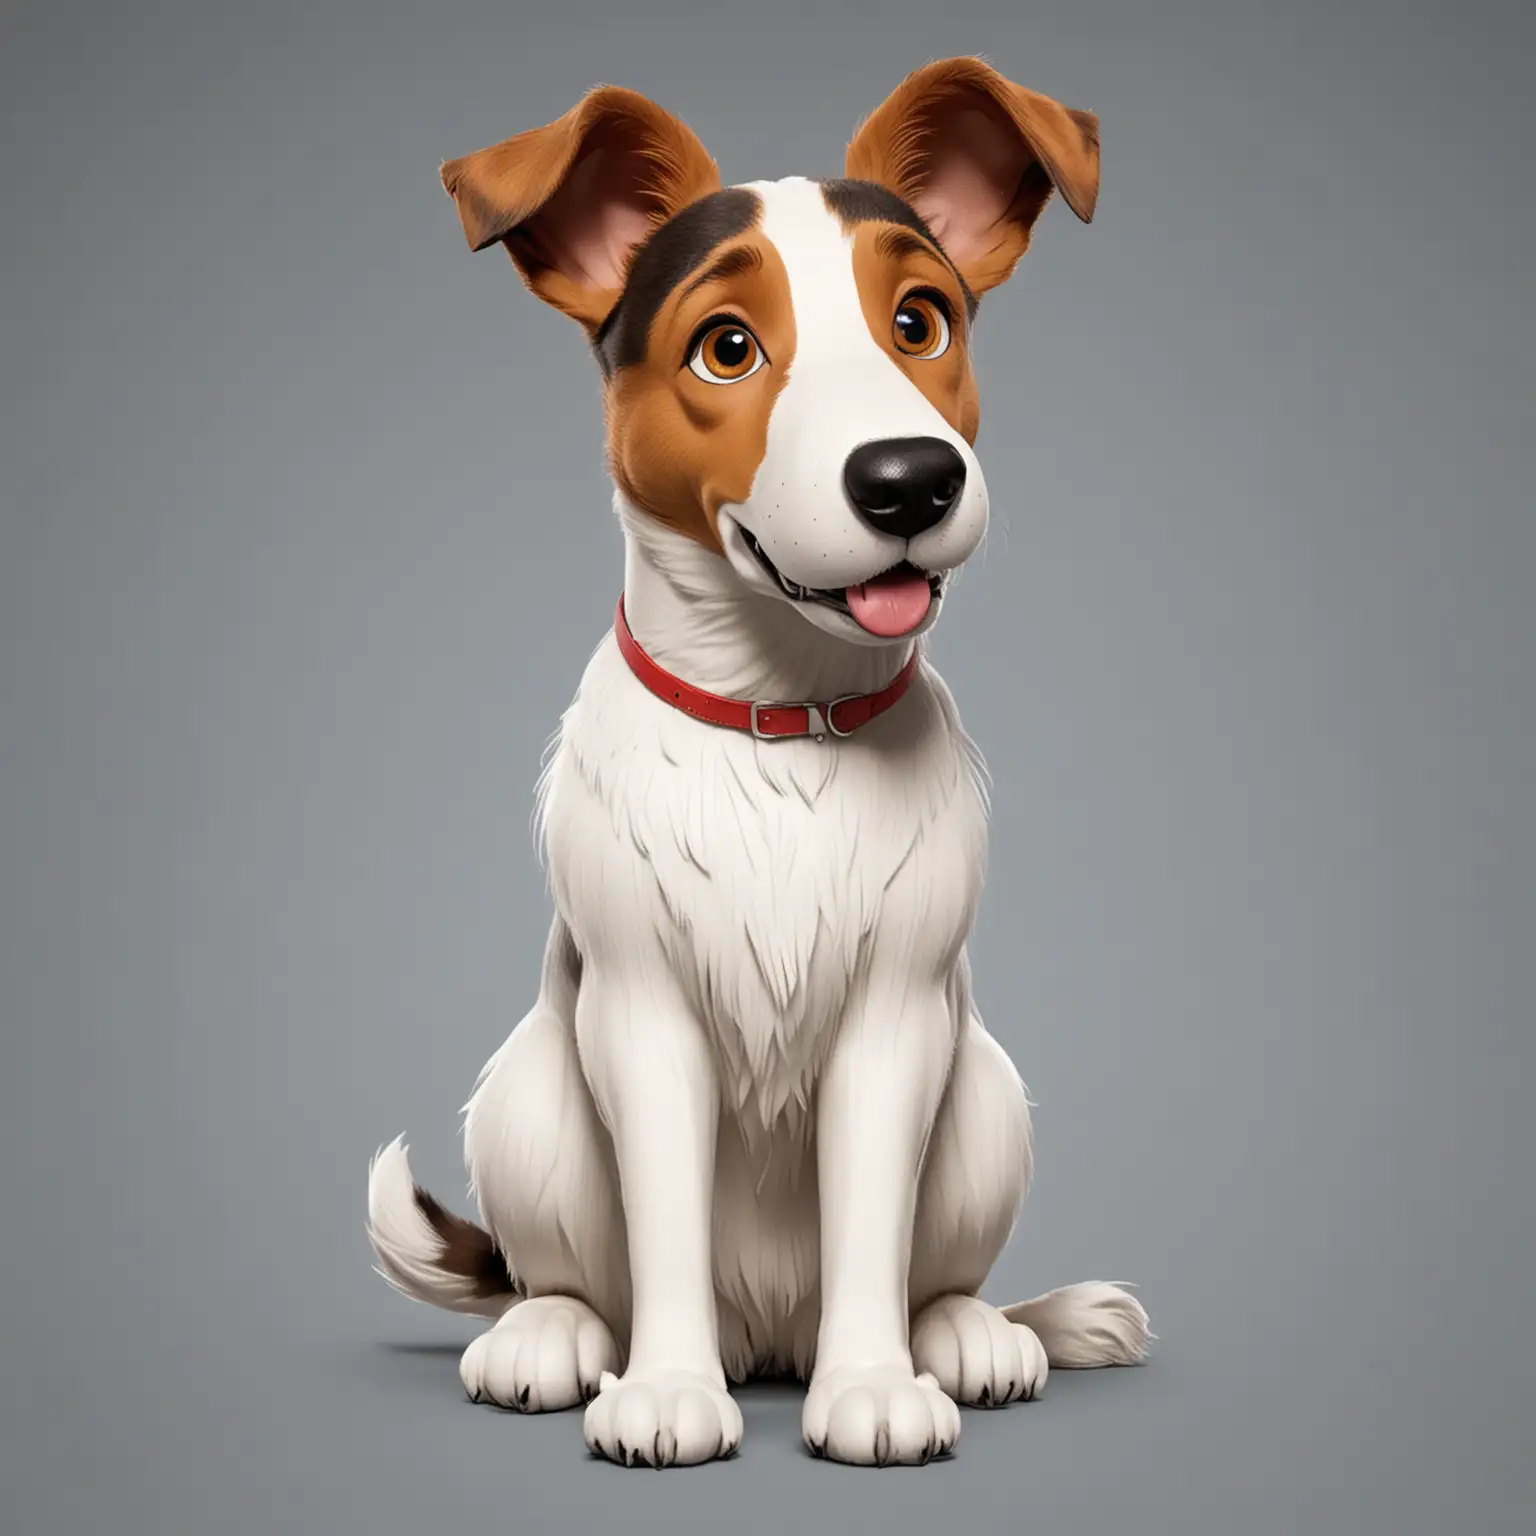 ShortHaired-Collie-Dog-Cartoon-Playful-Sit-Pose-in-Parody-of-Smooth-Fox-Terrier